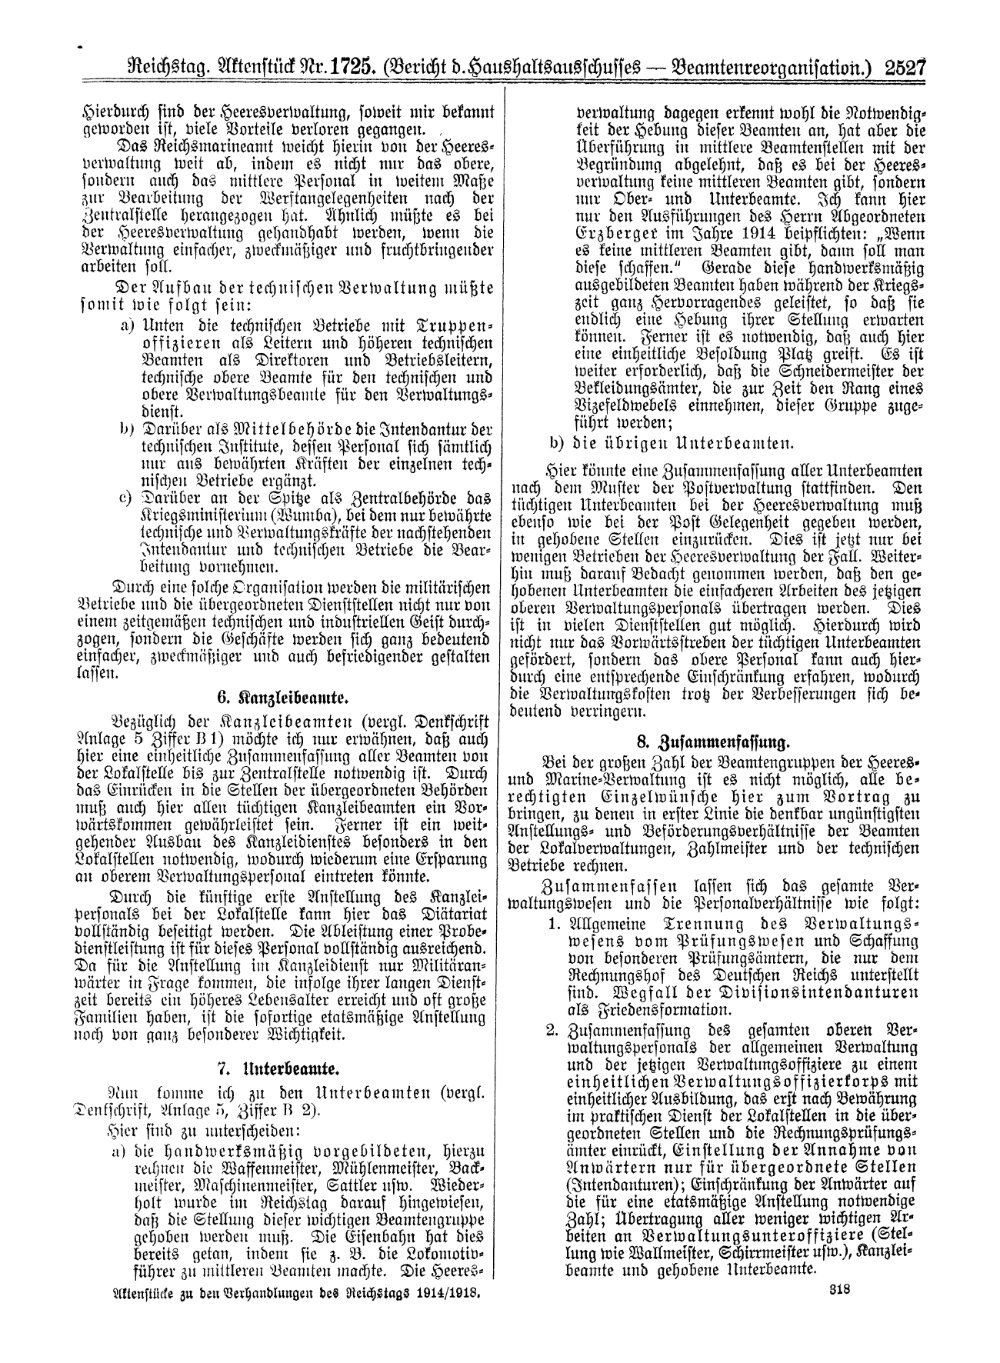 Scan of page 2527